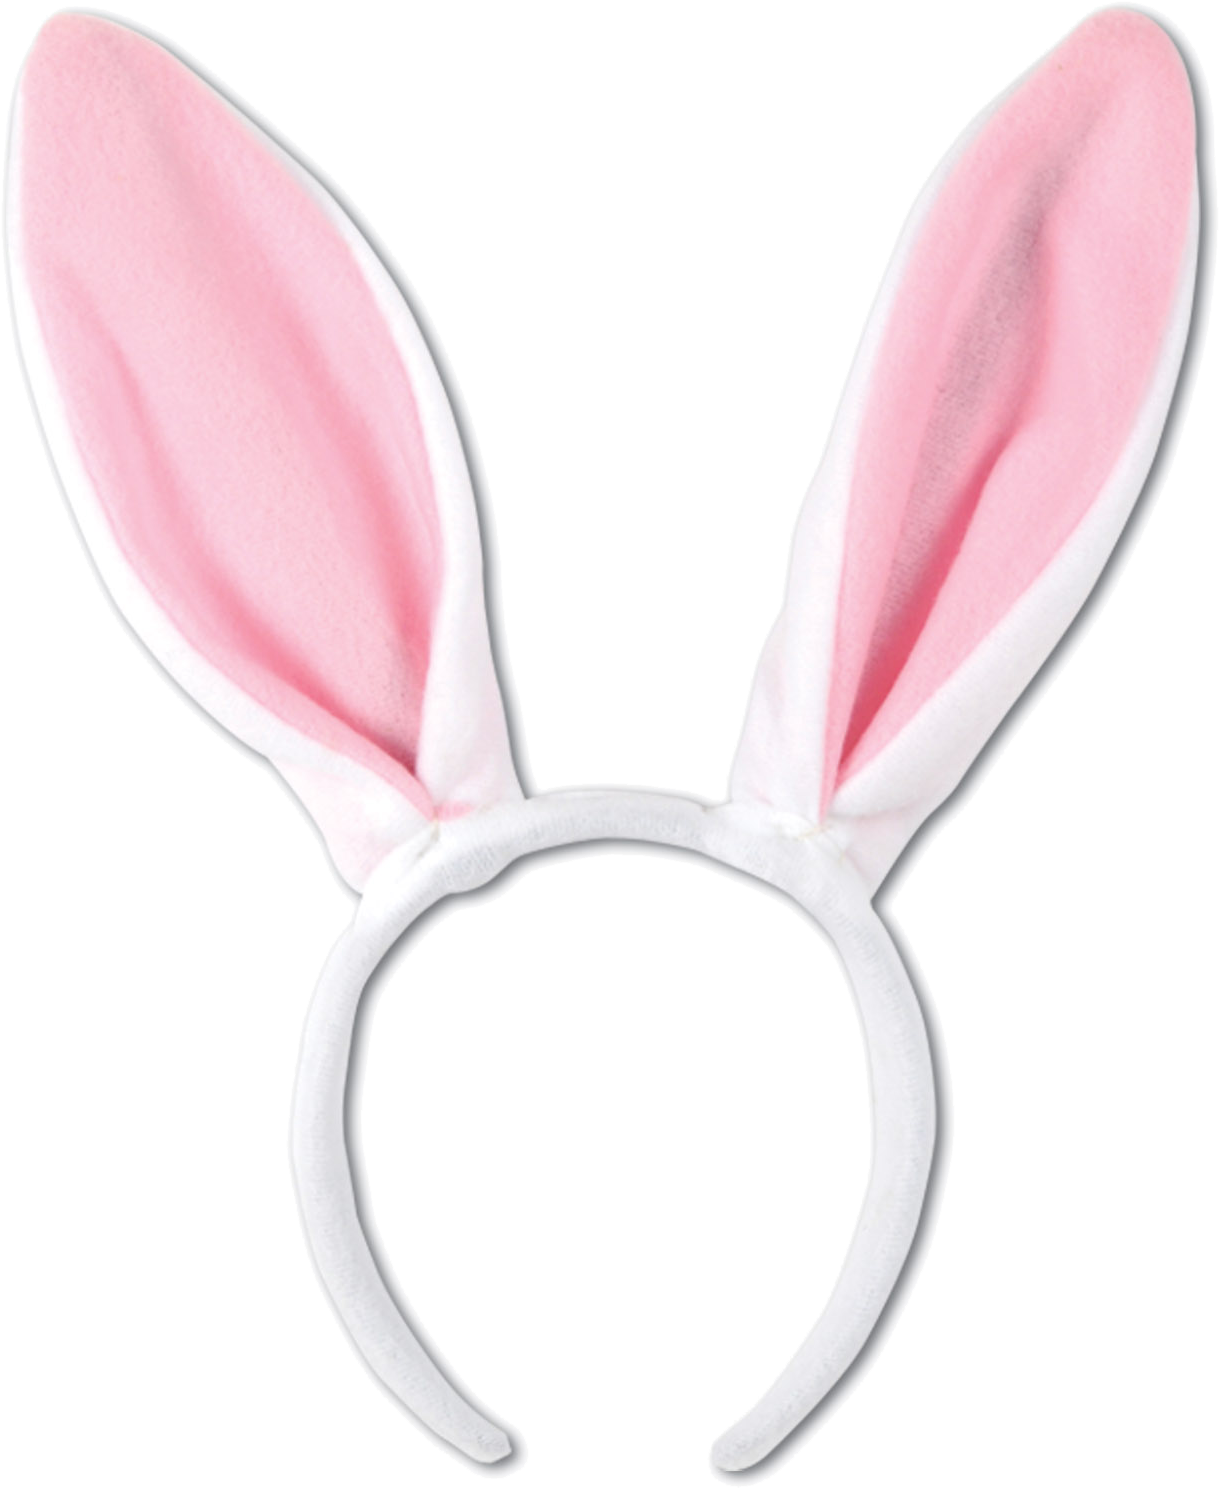 Bunny Ears PNG Free File Download